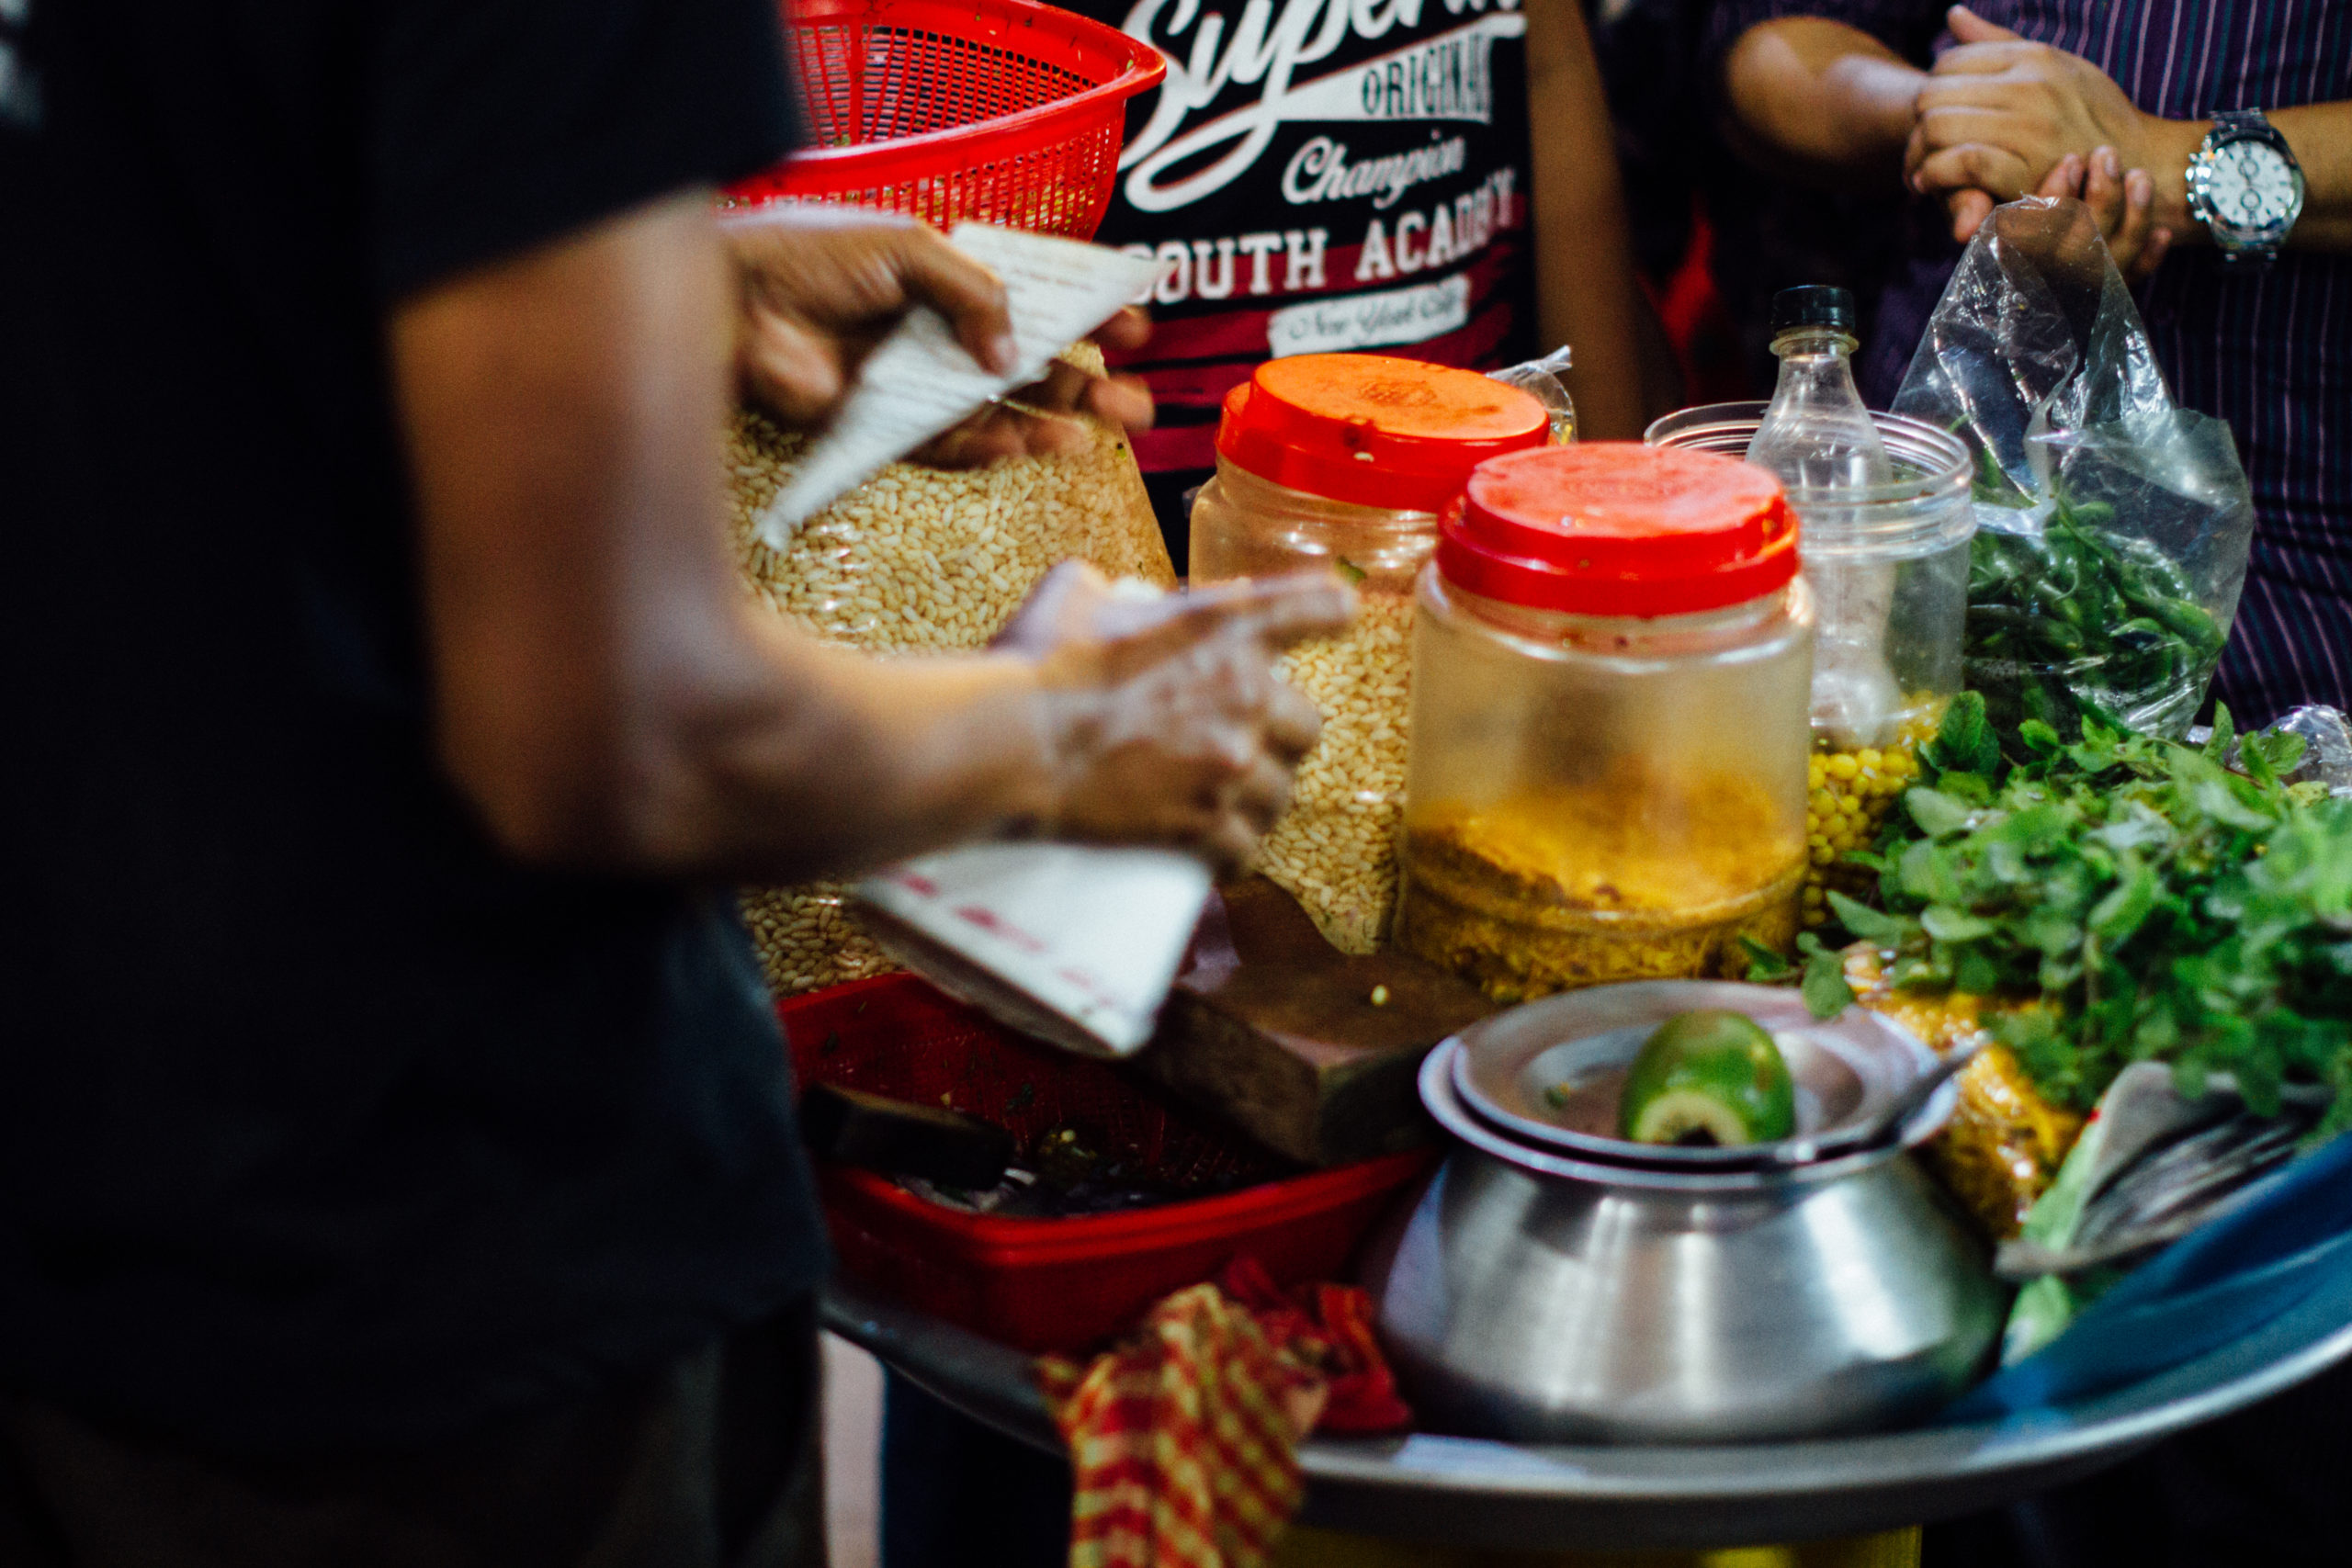 A street food vendor prepares ingredients at their stall in Chittagong, Bangladesh.